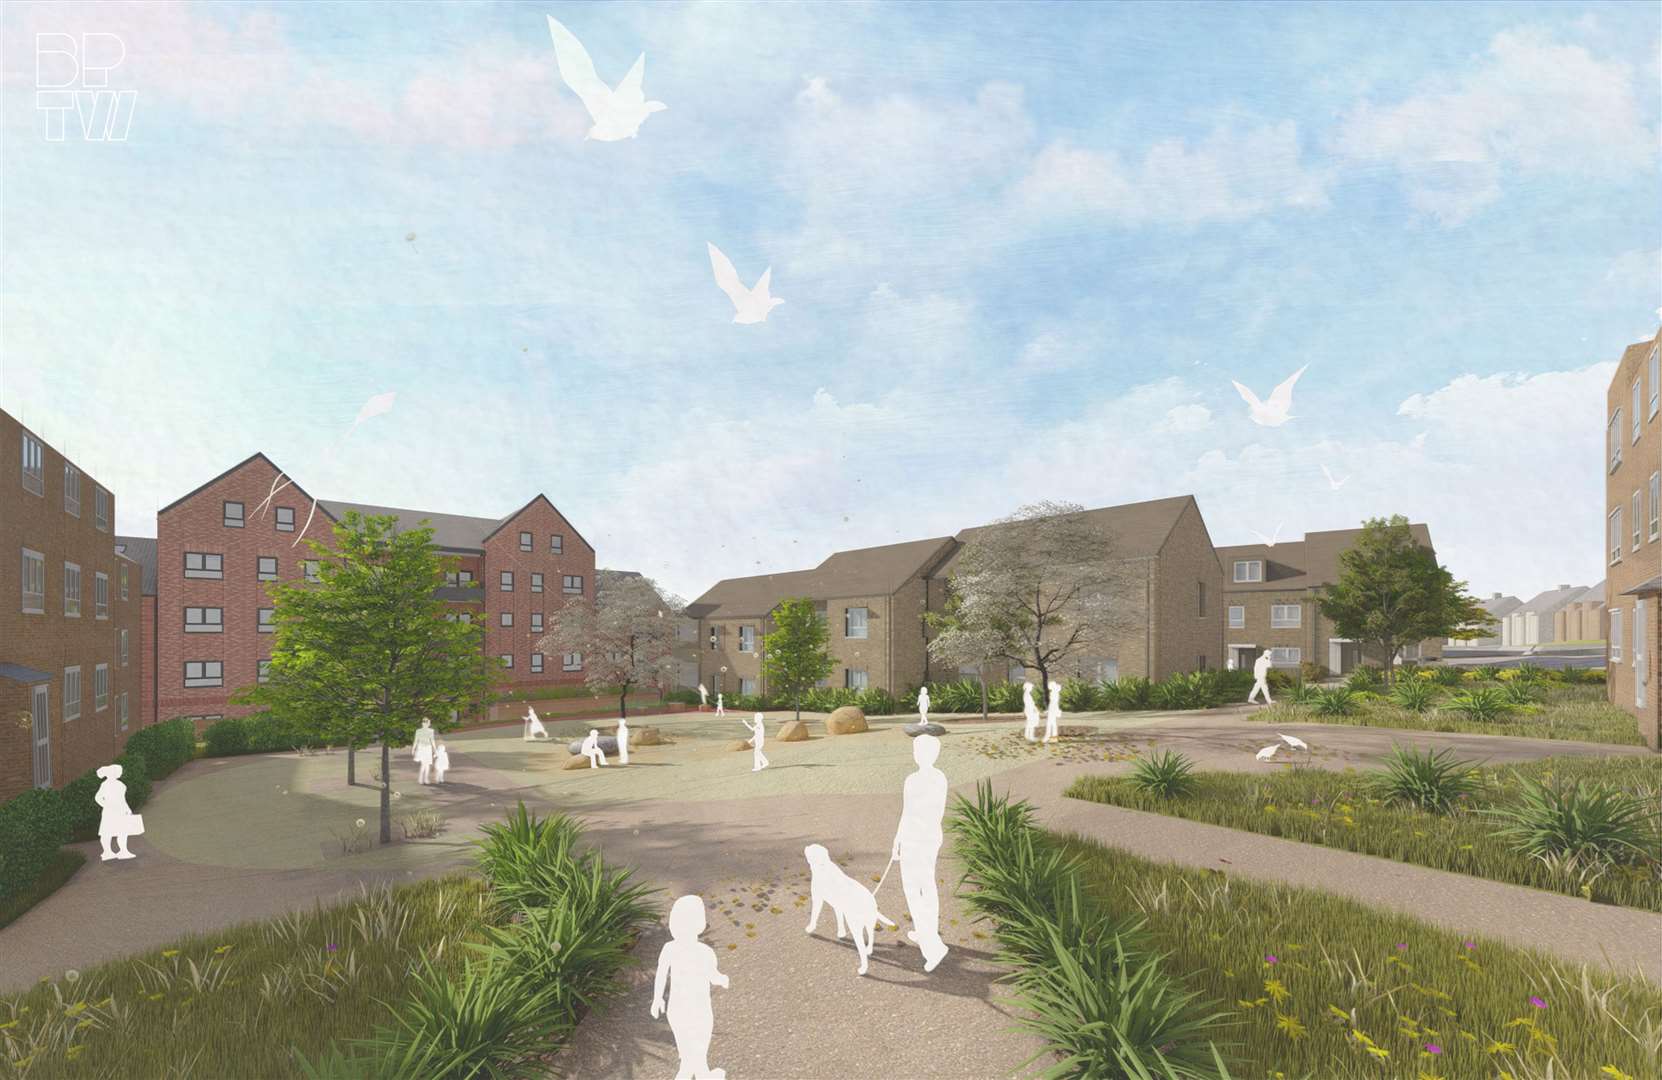 It is the next stage of the council's regeneration to deliver new homes for the borough. Picture: BPTW